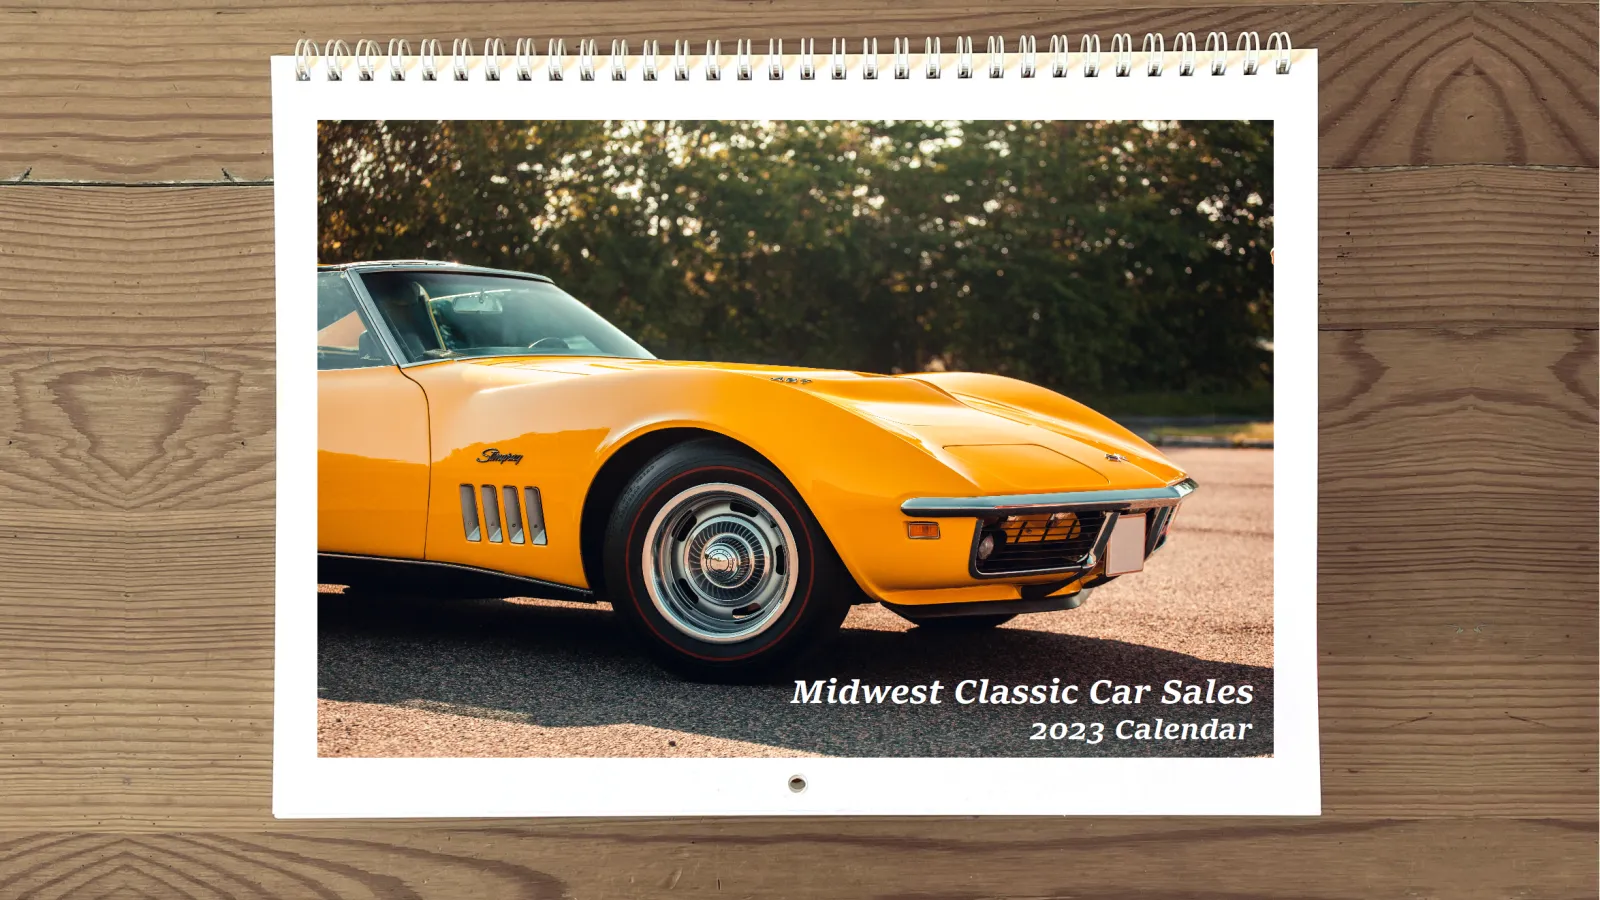 A promotional Calendar displaying a yellow sports car